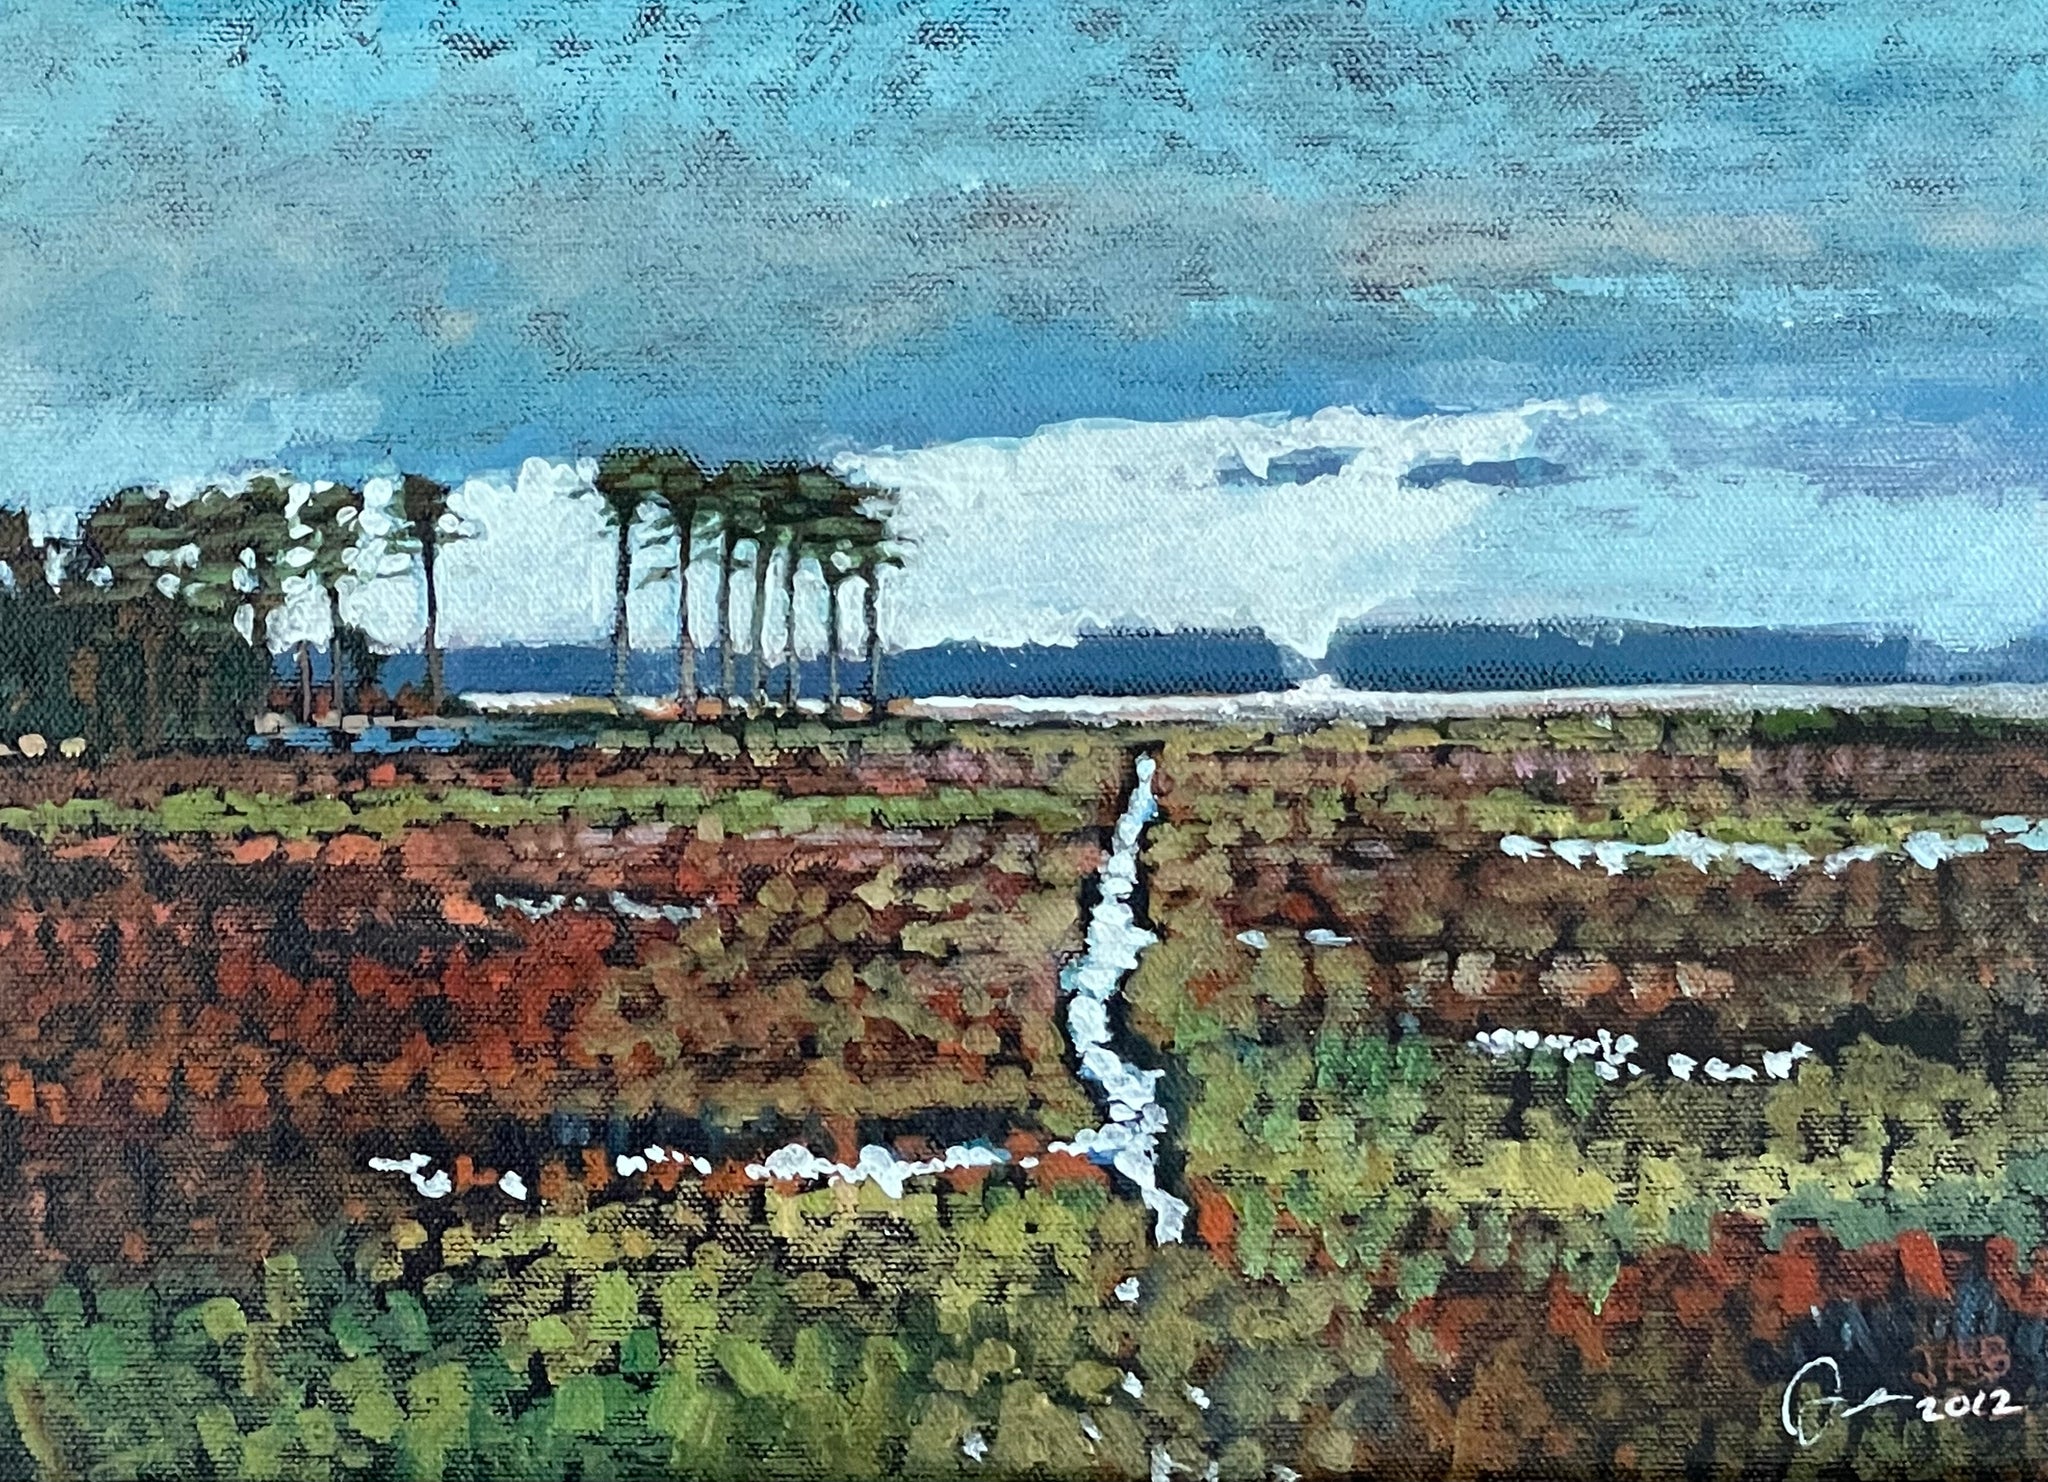 Autumn at Fenwick with clearing sky: 9X12 acrylic